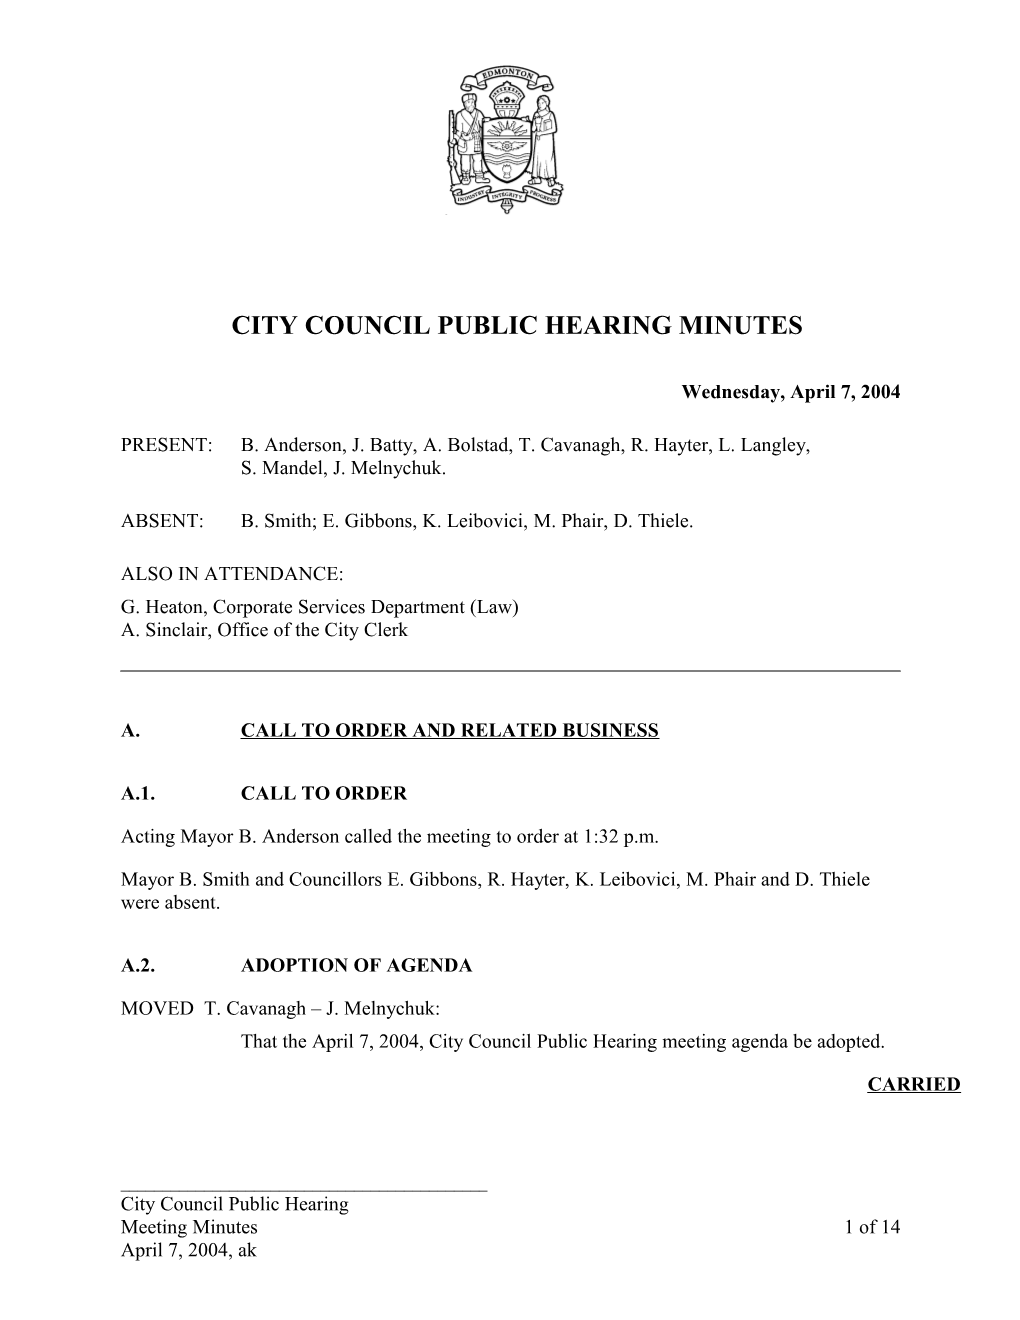 Minutes for City Council April 7, 2004 Meeting